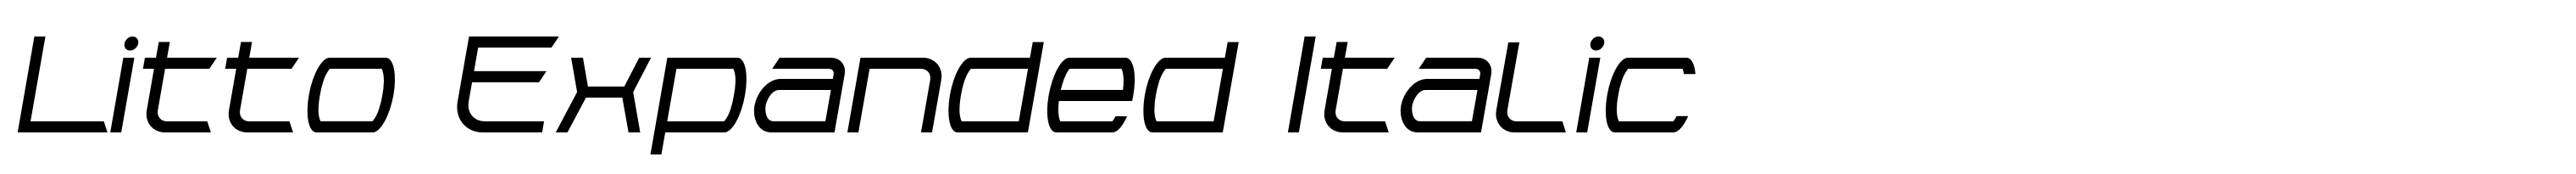 Litto Expanded Italic